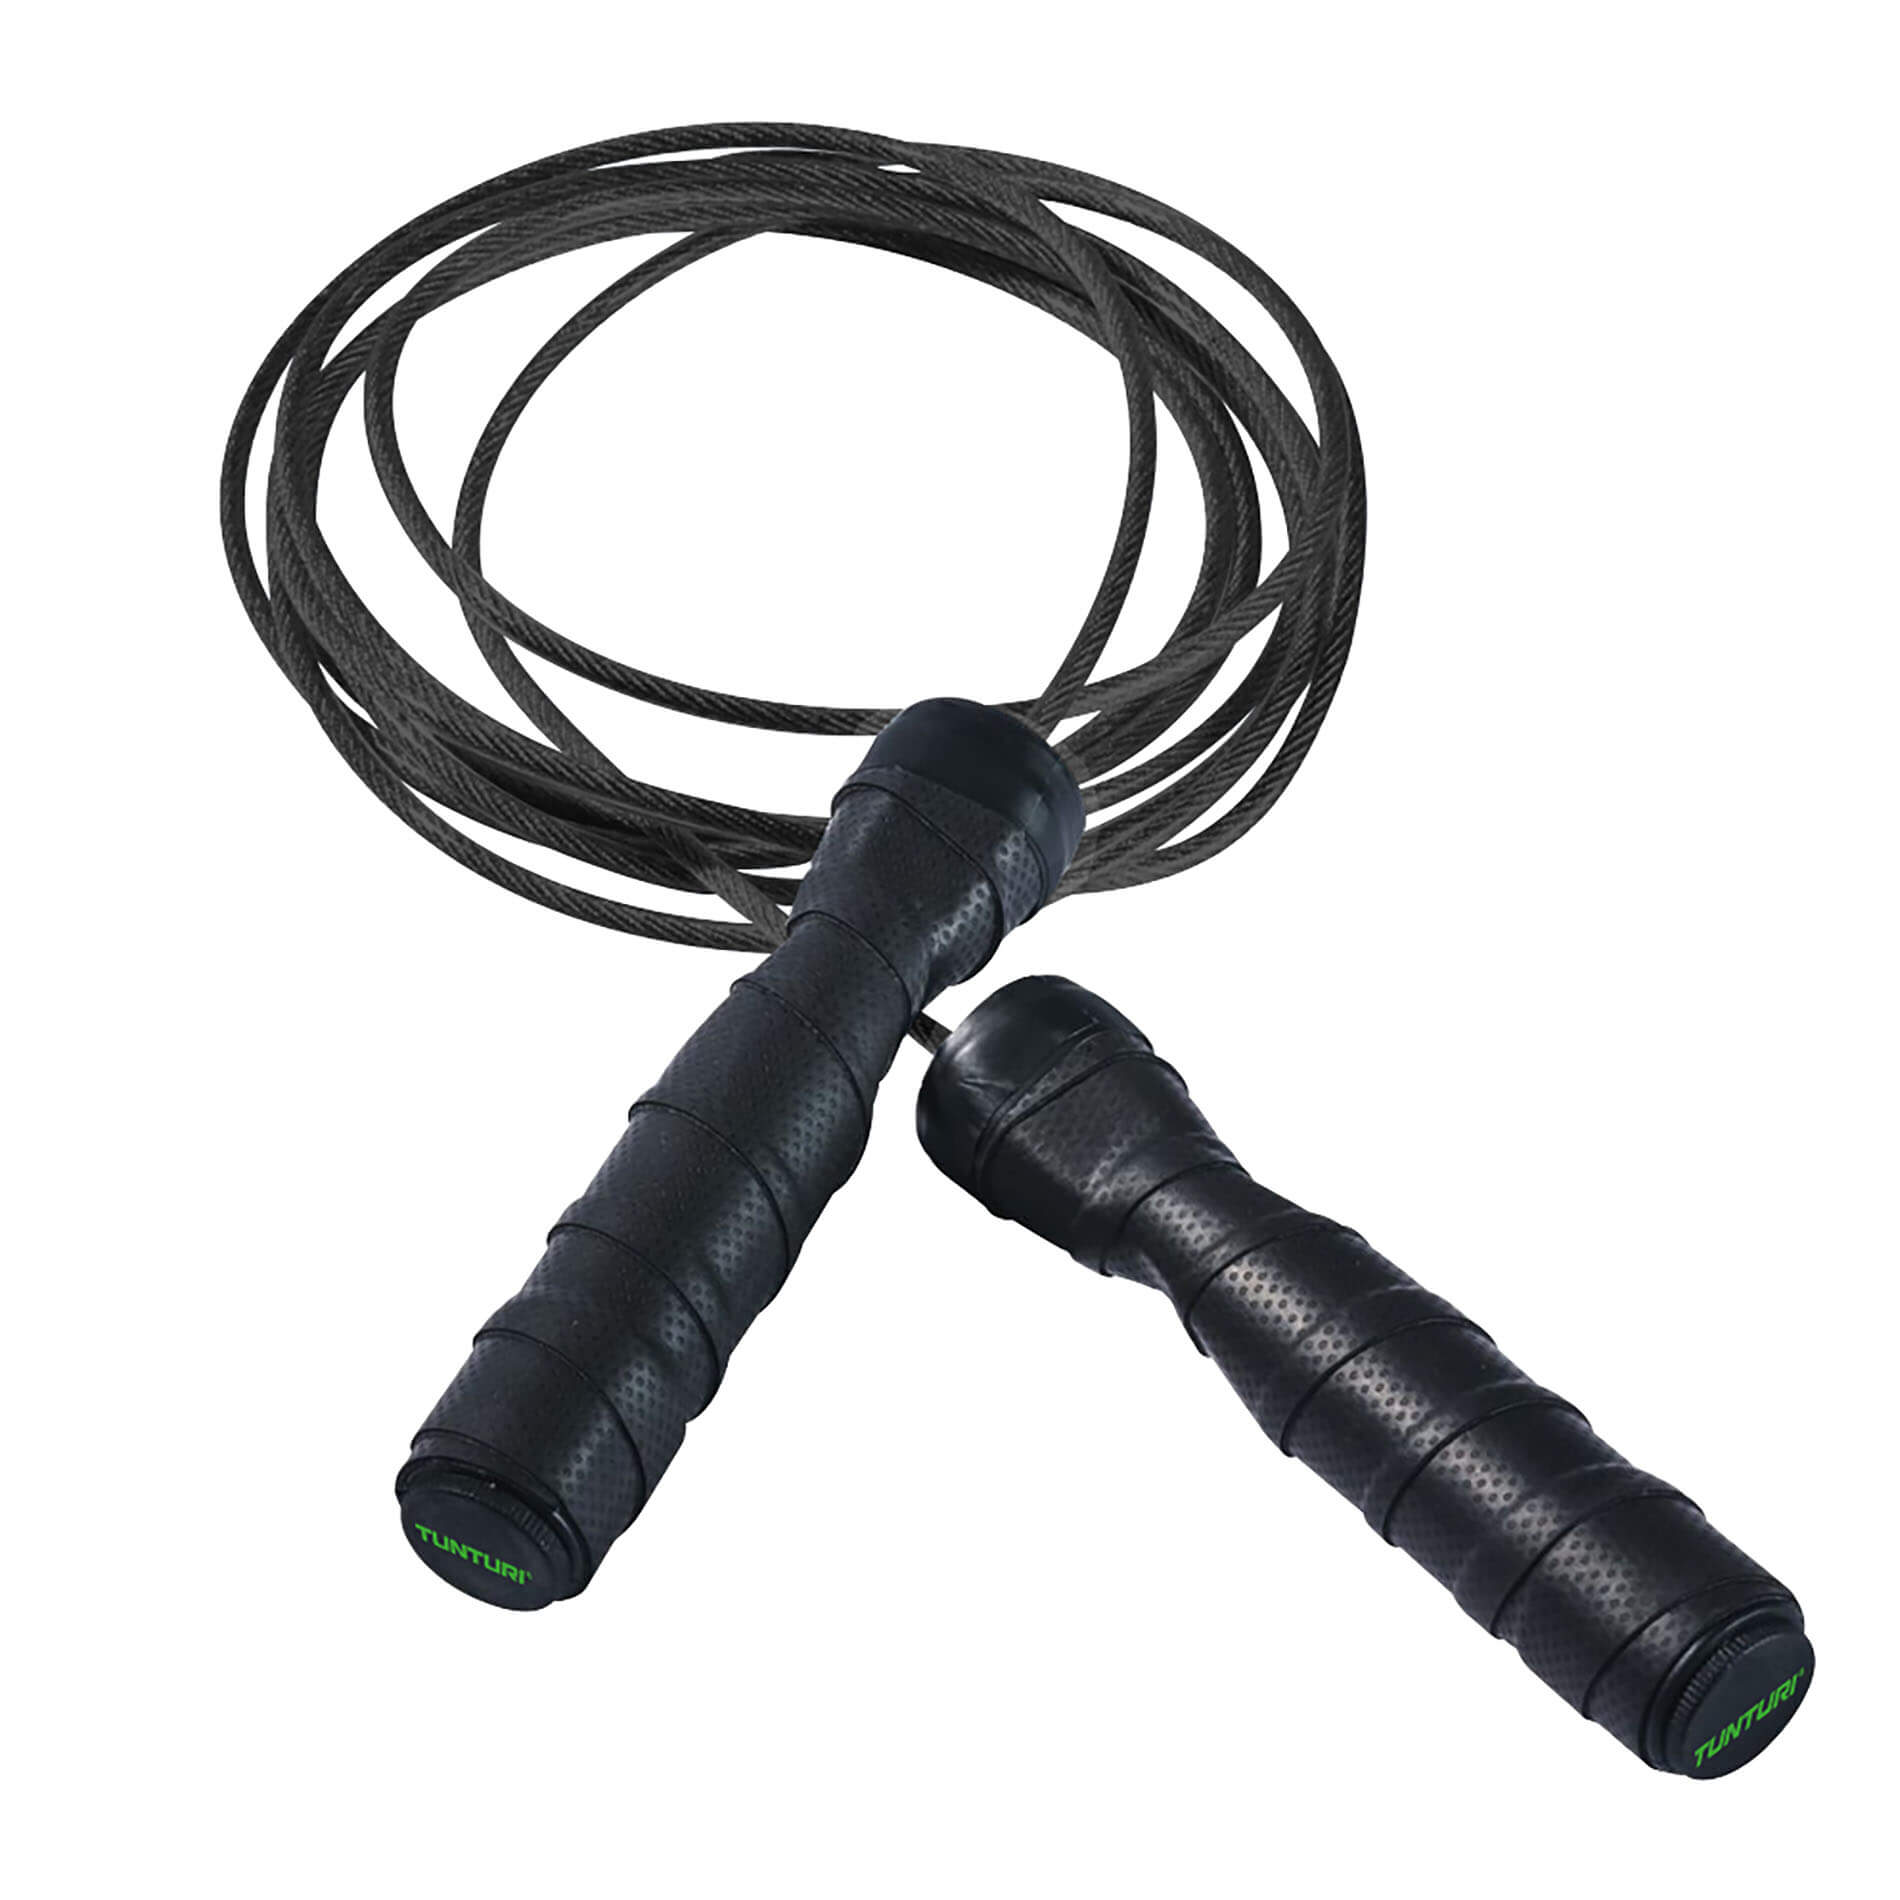 Steel Weighted Pro Jumprope With Sweatband